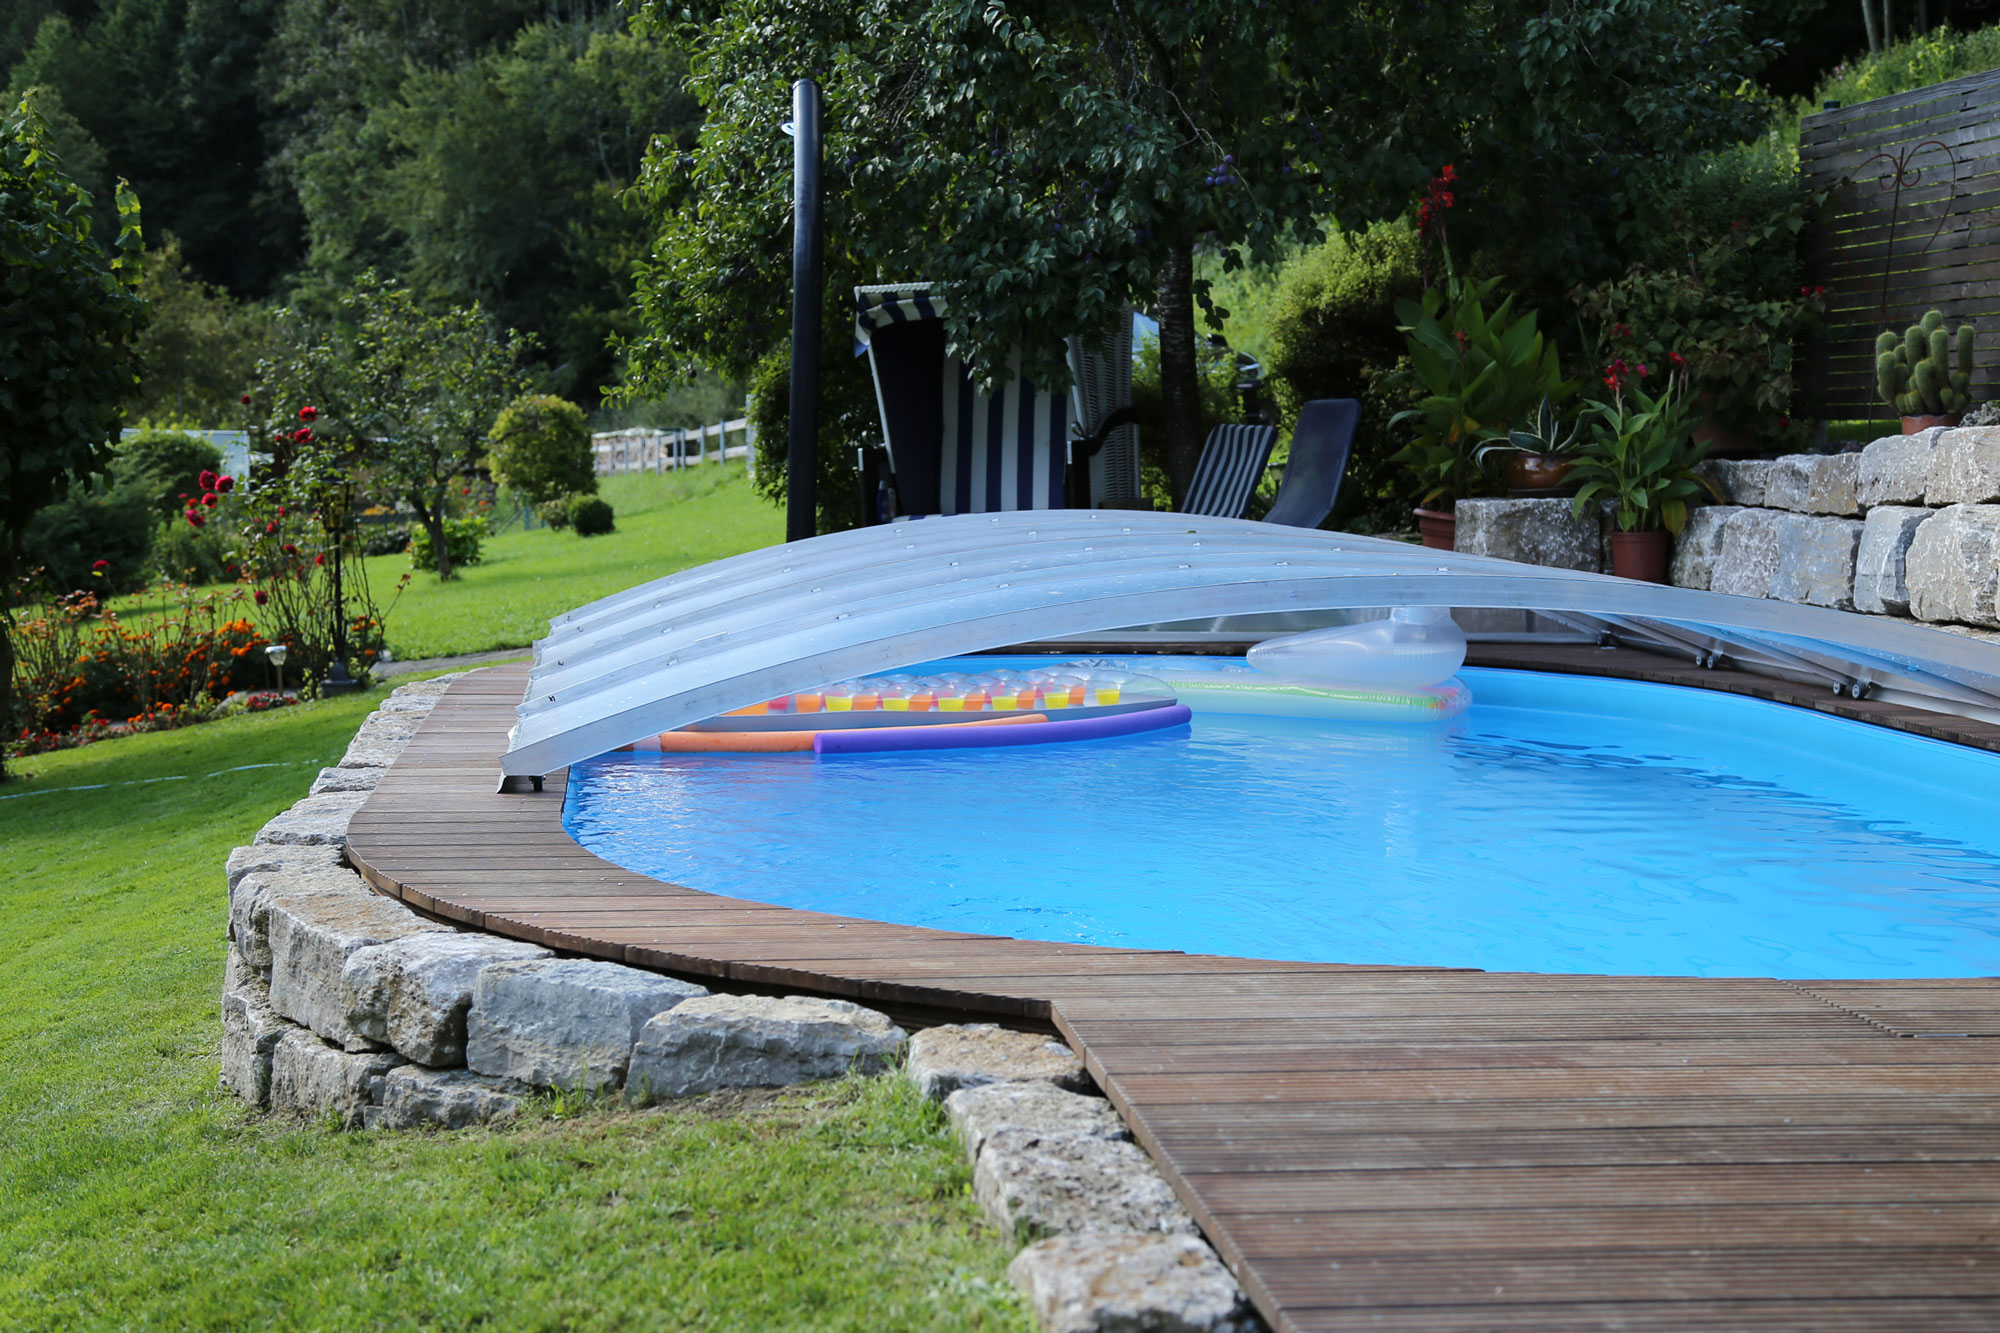 FlexiRoof available in 6 variants, pool cover for every requirement